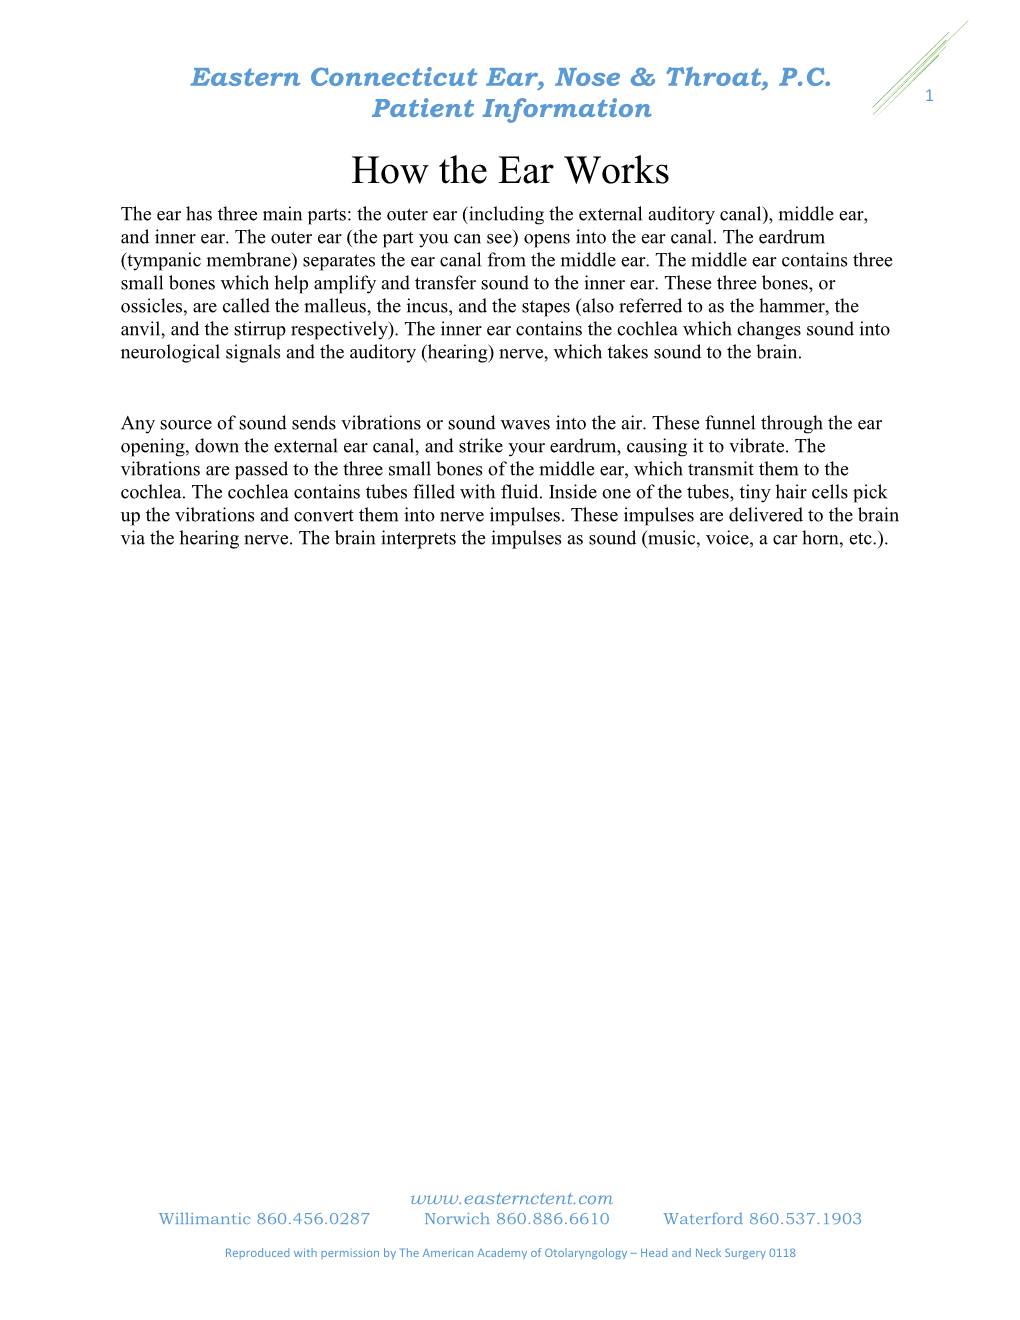 How the Ear Works the Ear Has Three Main Parts: the Outer Ear (Including the External Auditory Canal), Middle Ear, and Inner Ear